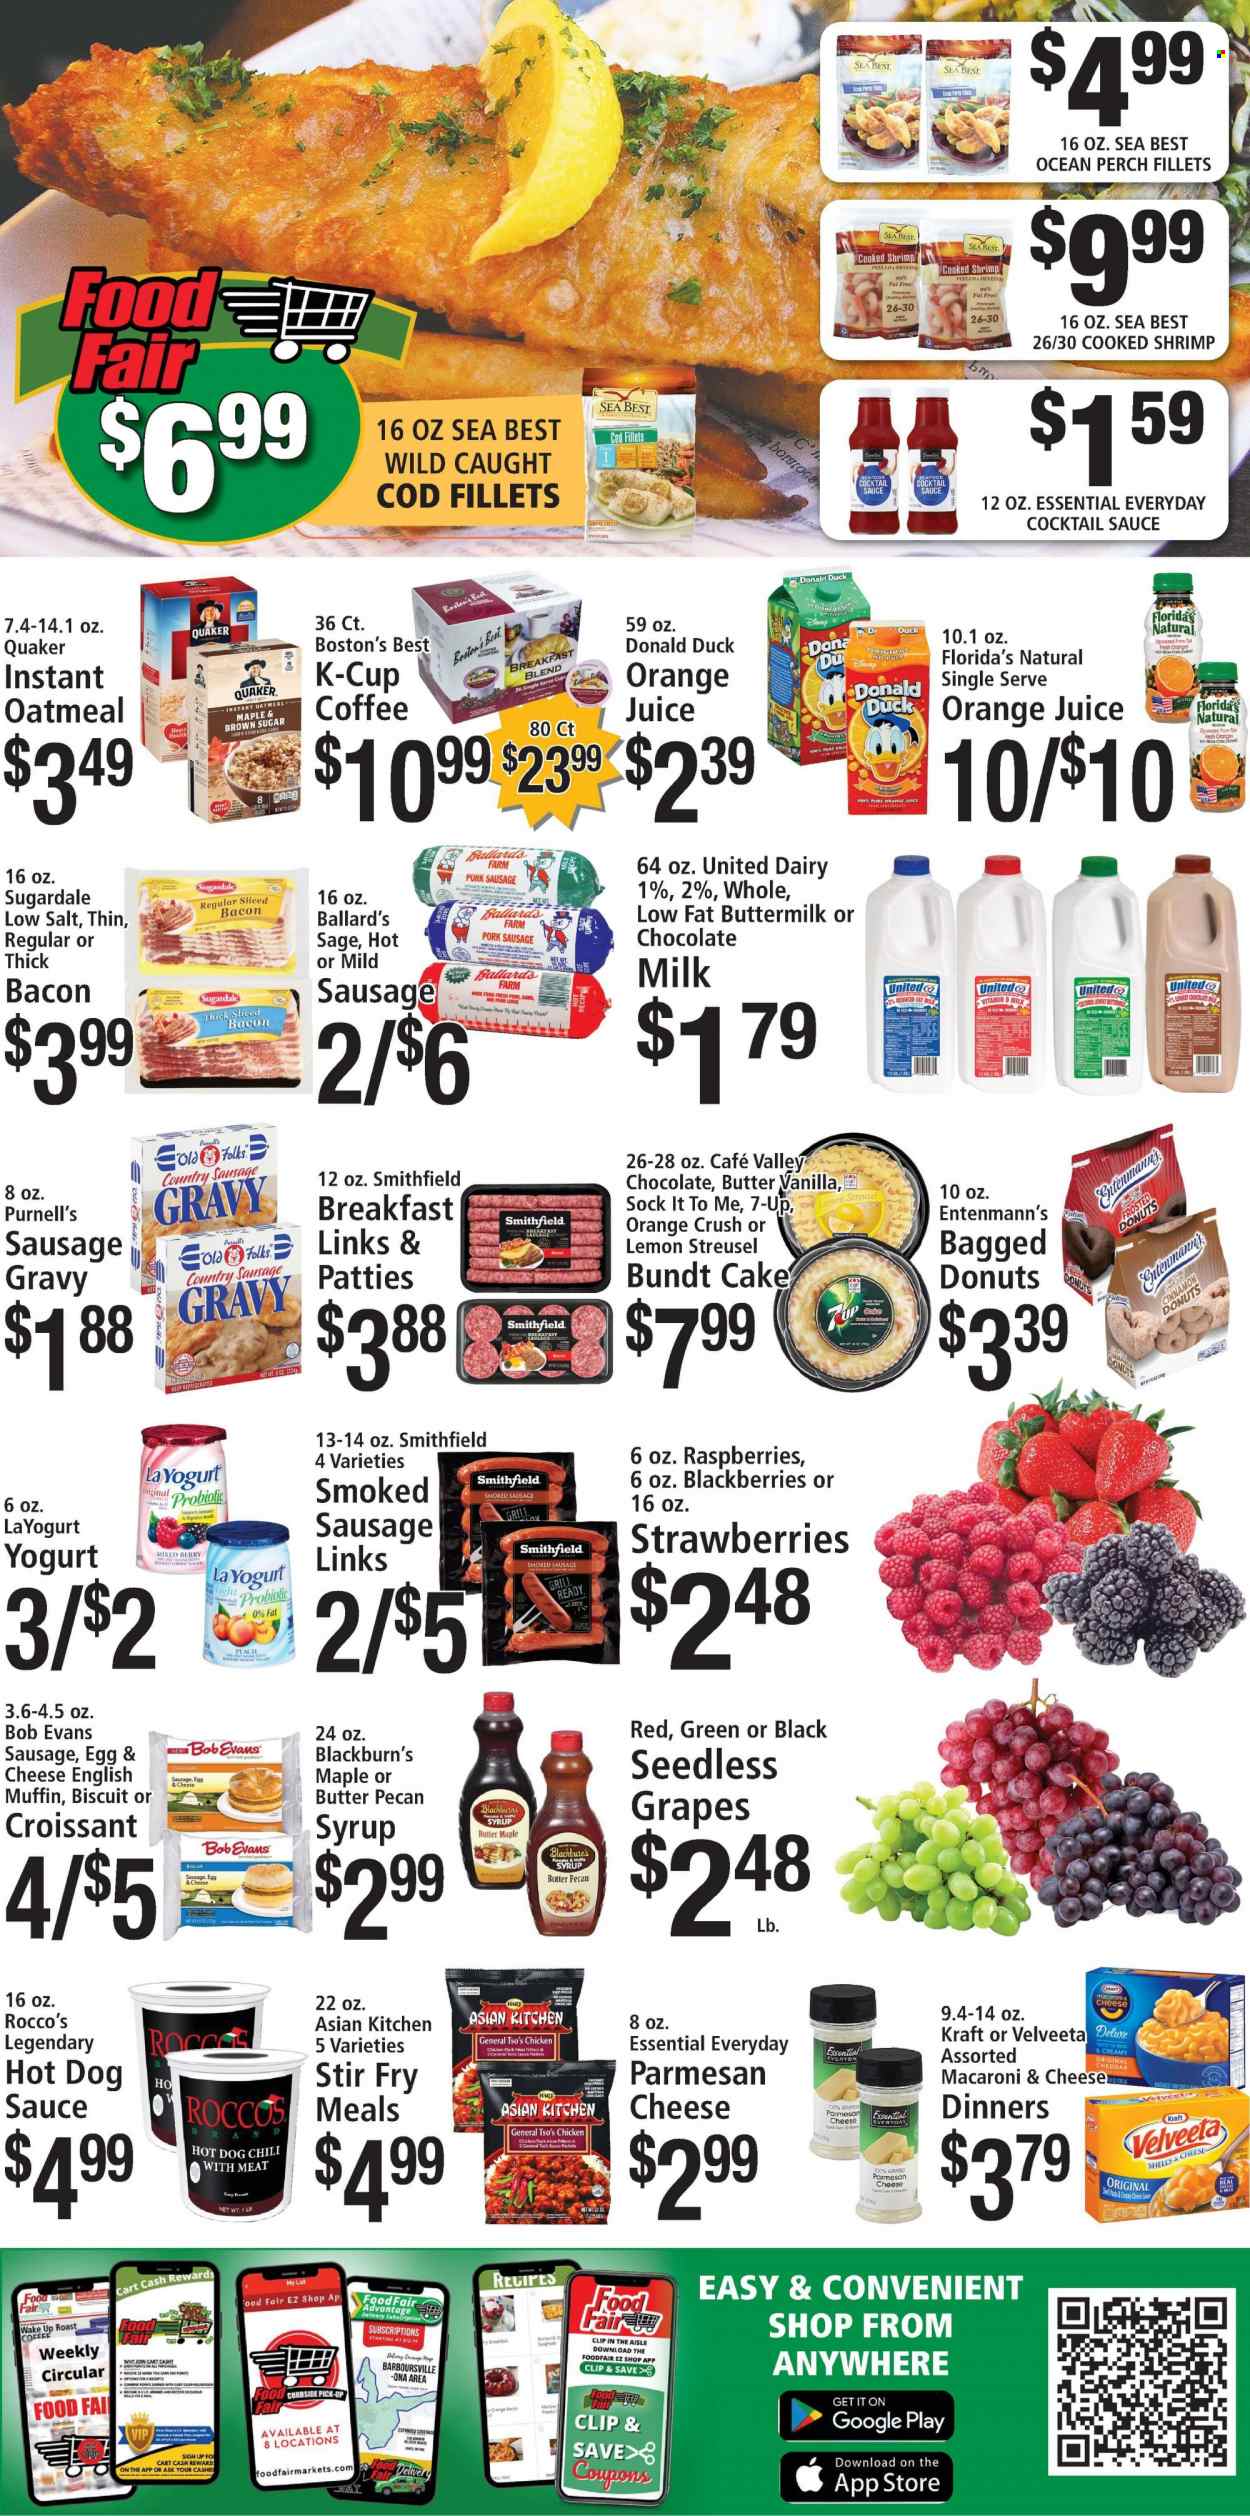 thumbnail - Food Fair Market Flyer - 03/26/2023 - 04/01/2023 - Sales products - english muffins, cake, bundt, donut, muffin, Entenmann's, blackberries, grapes, seedless grapes, strawberries, cod, perch, seafood, shrimps, macaroni & cheese, sausage gravy, hot dog, pasta, sauce, pancakes, Quaker, Kraft®, Bob Evans, Sugardale, roast, sausage, smoked sausage, pork sausage, bacon sausage, parmesan, Disney, yoghurt, buttermilk, milk chocolate, biscuit, Digestive, Florida's Natural, cane sugar, oatmeal, cinnamon, cocktail sauce, syrup, orange juice, juice, 7UP, coffee, coffee capsules, K-Cups, breakfast blend, chicken. Page 2.